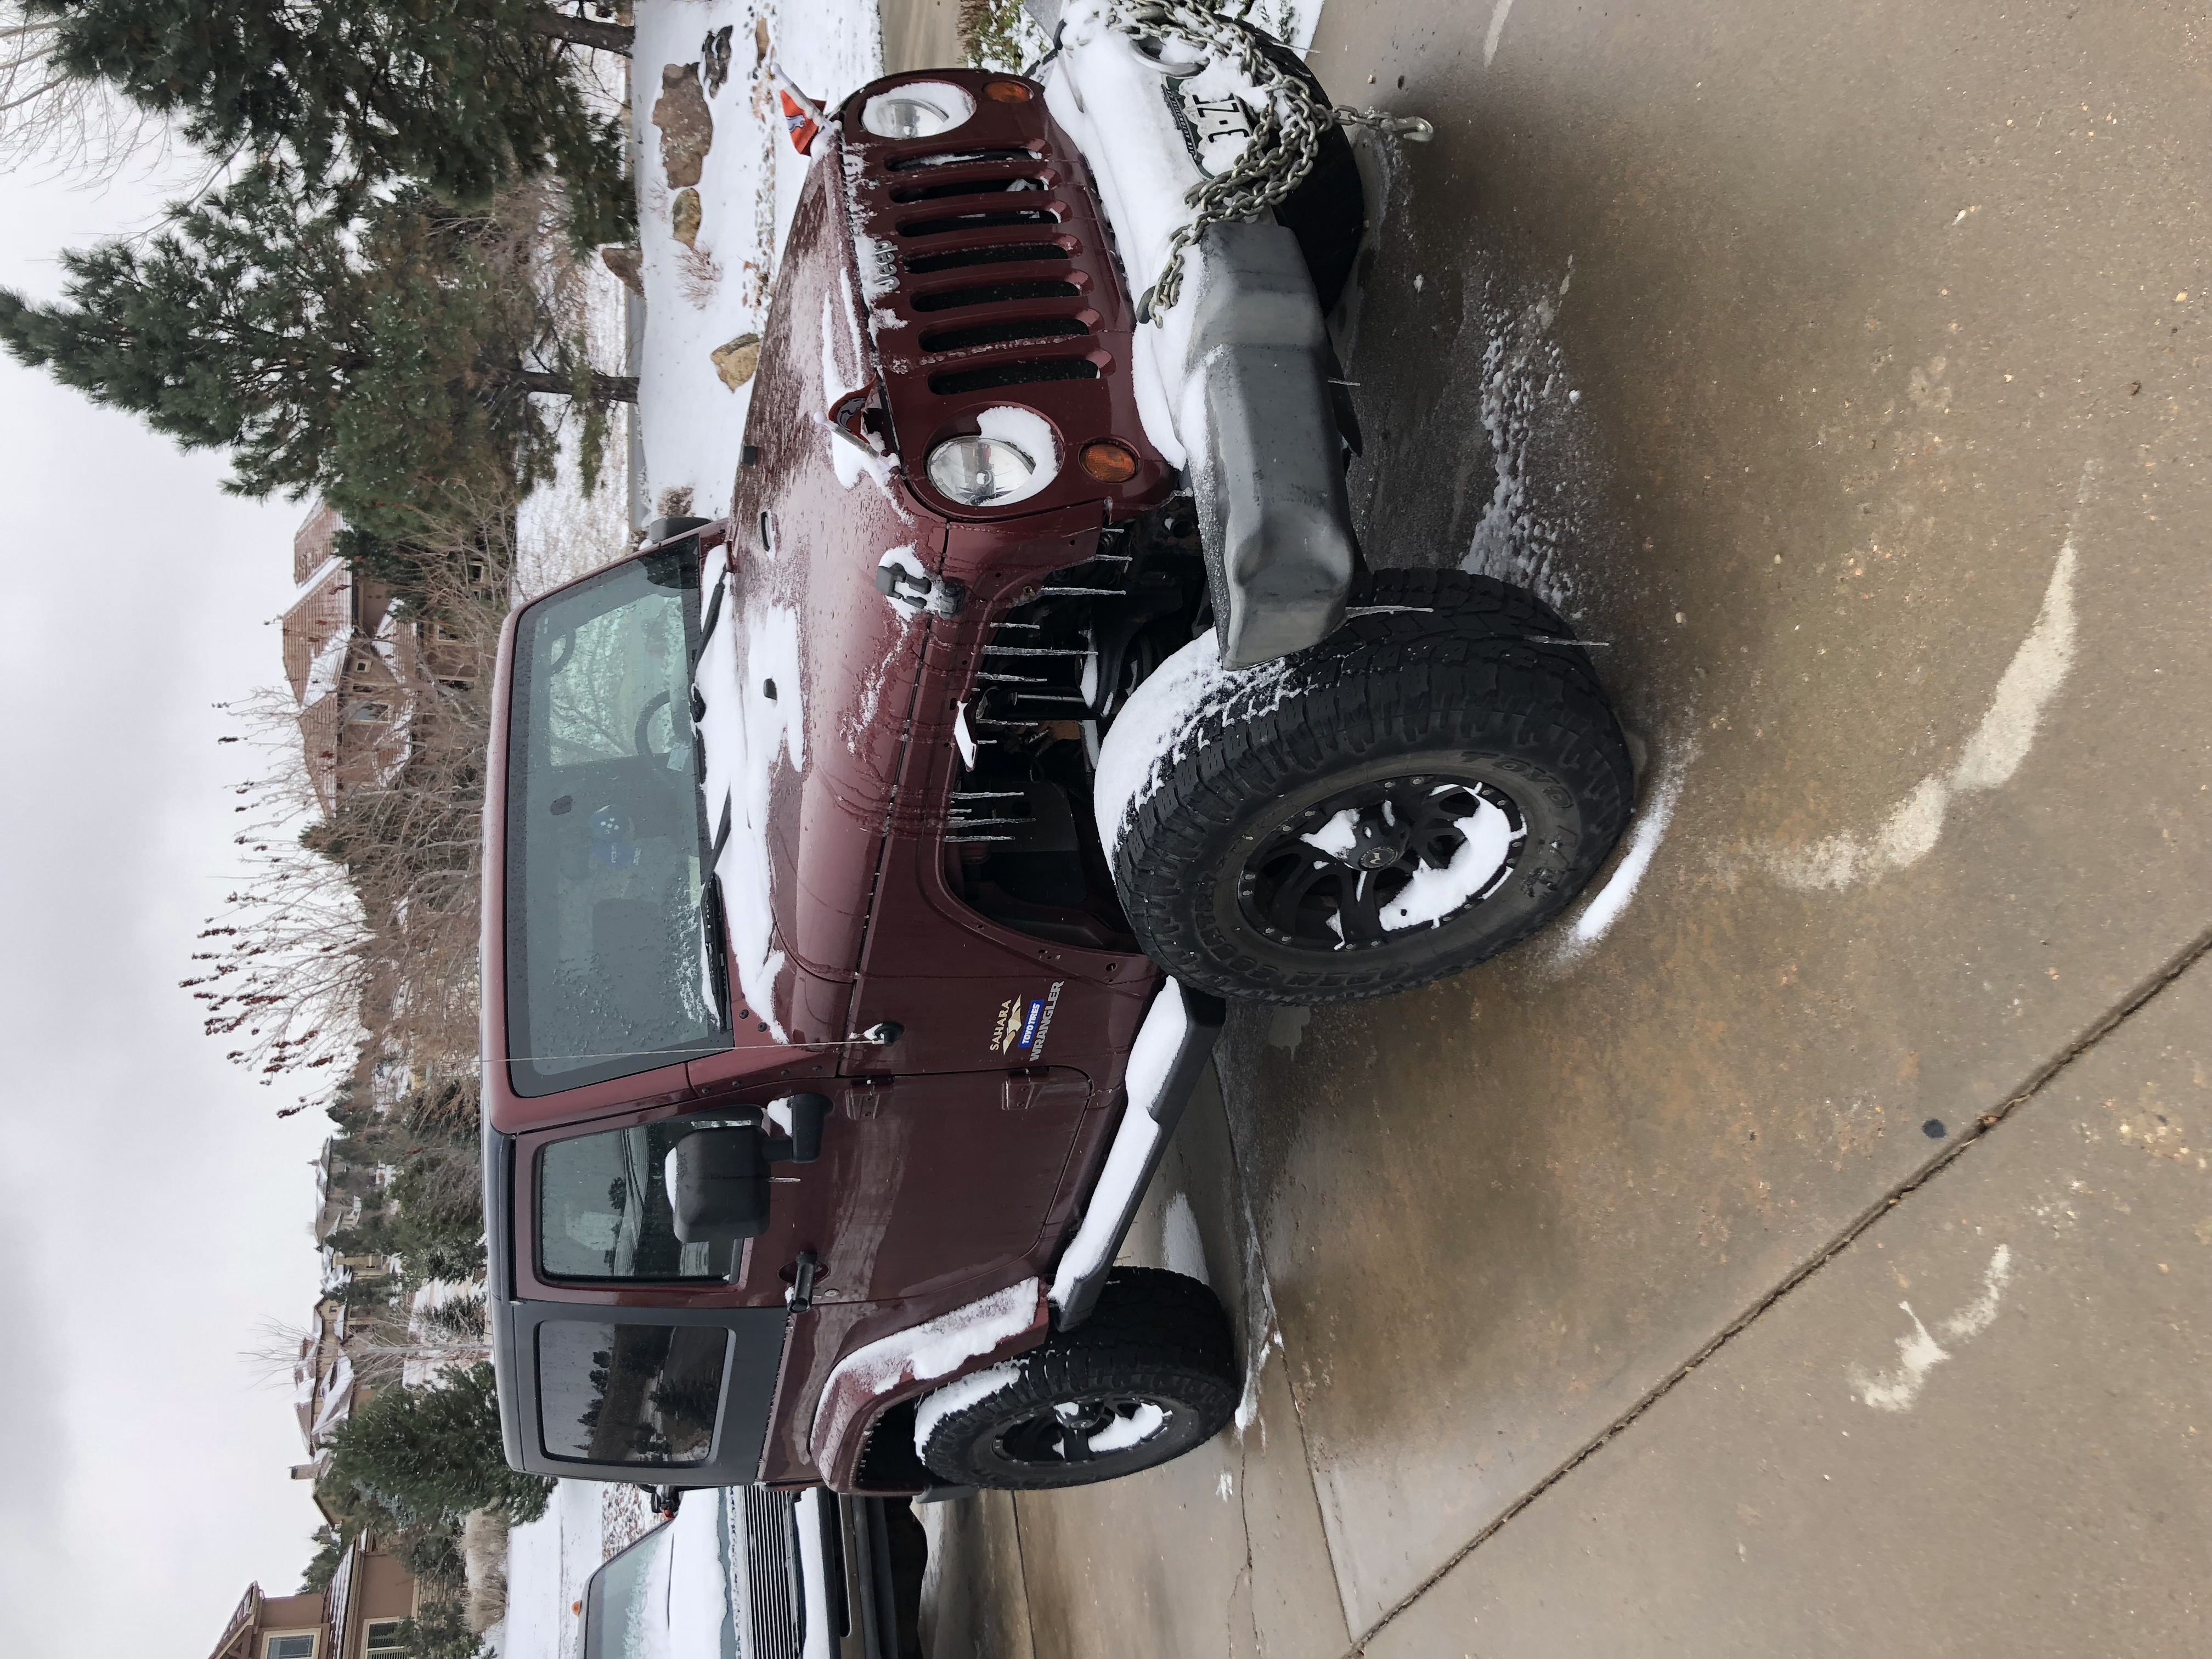 Used Jeep Wrangler for Sale Right Now Under $5,000 - Autotrader